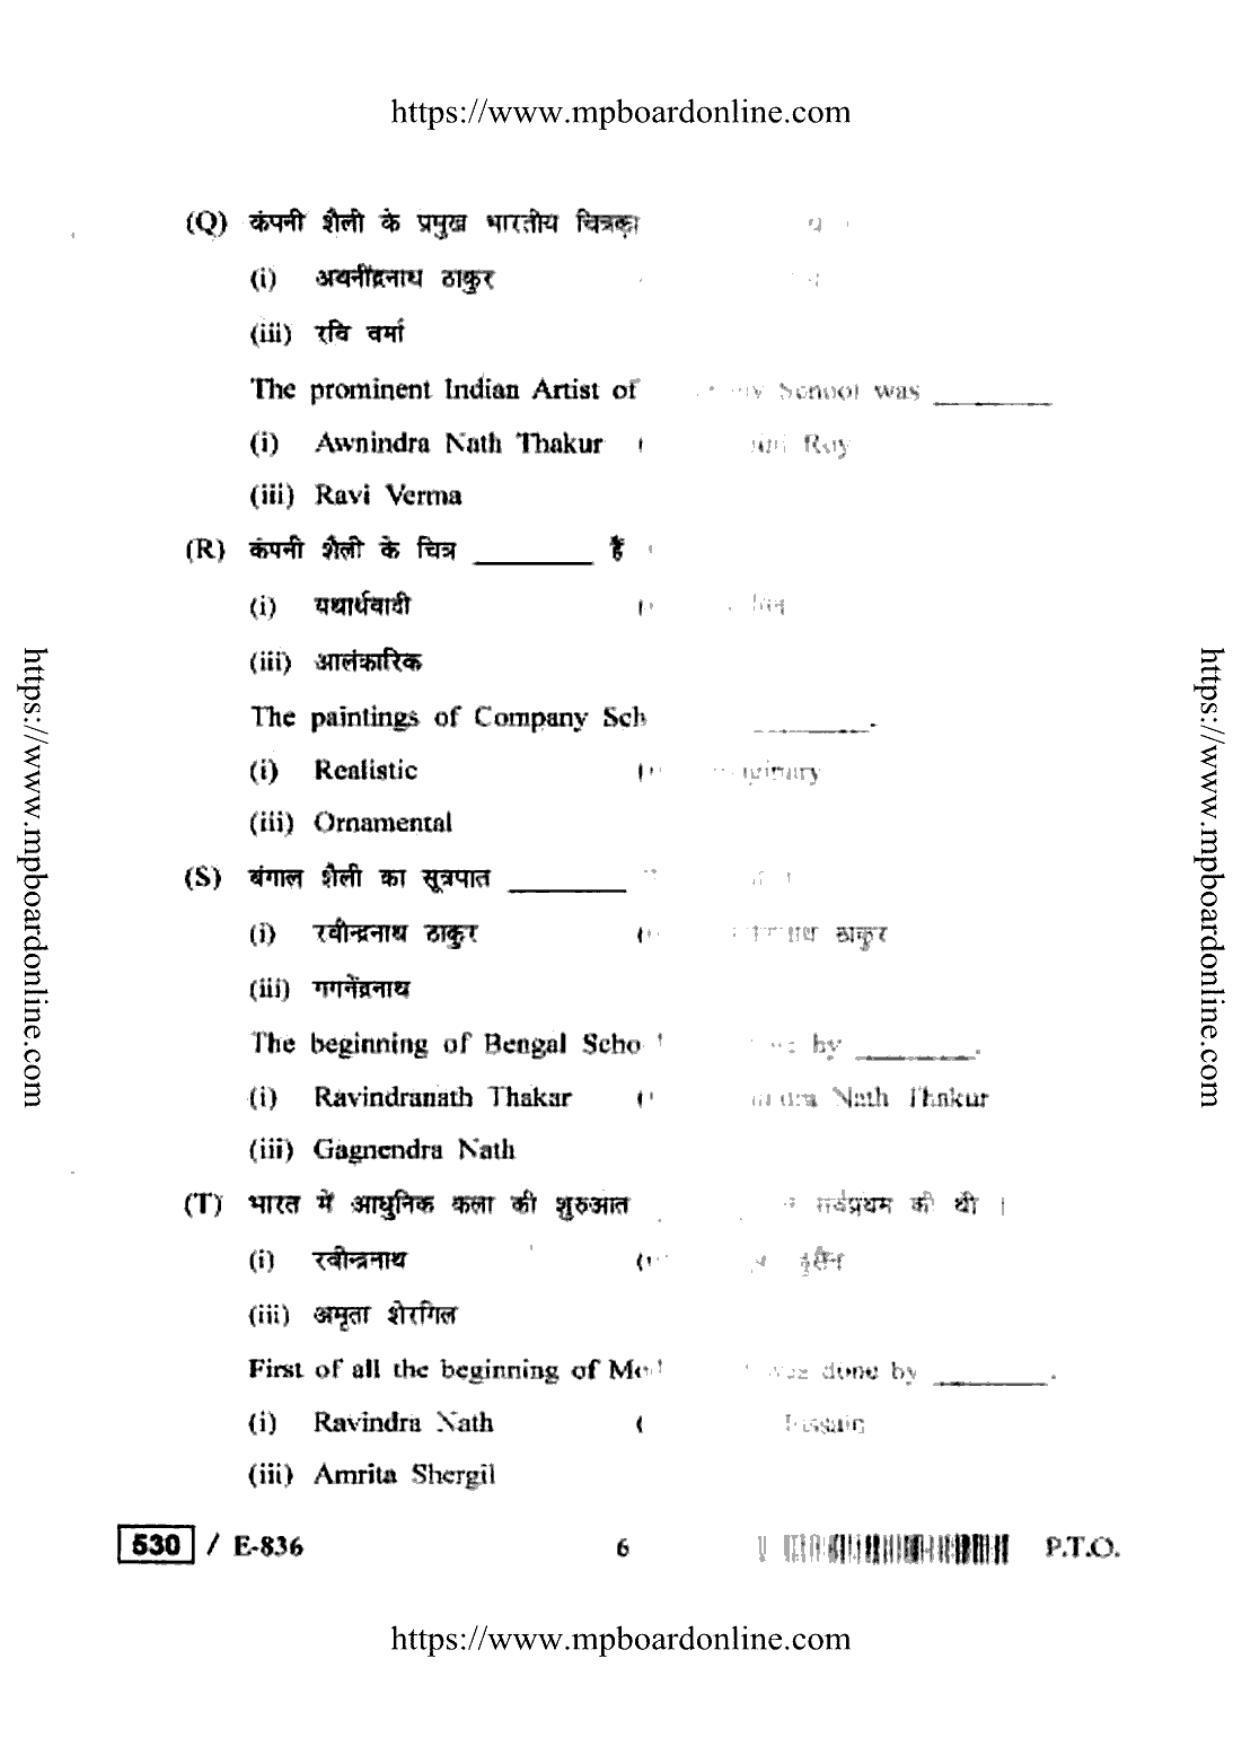 MP Board Class 12 History Of Indian Art 2020 Question Paper - Page 6